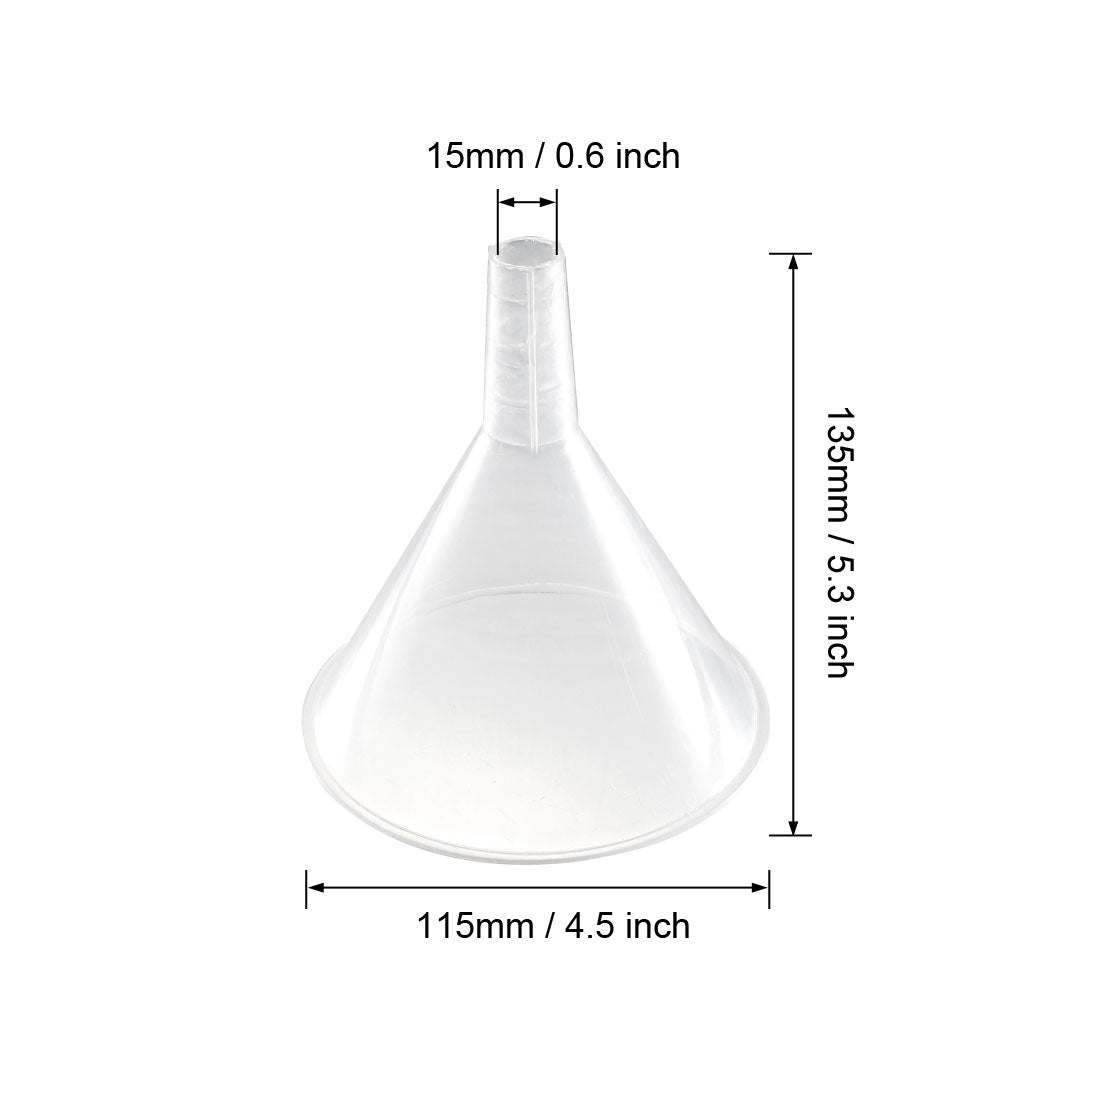 uxcell Uxcell 6pcs Clear Plastic Funnels 4.5 inch Dia. Mouth Transfer Filling Tool for Bottle Filling Perfumes Essential Oils Laboratory Chemicals